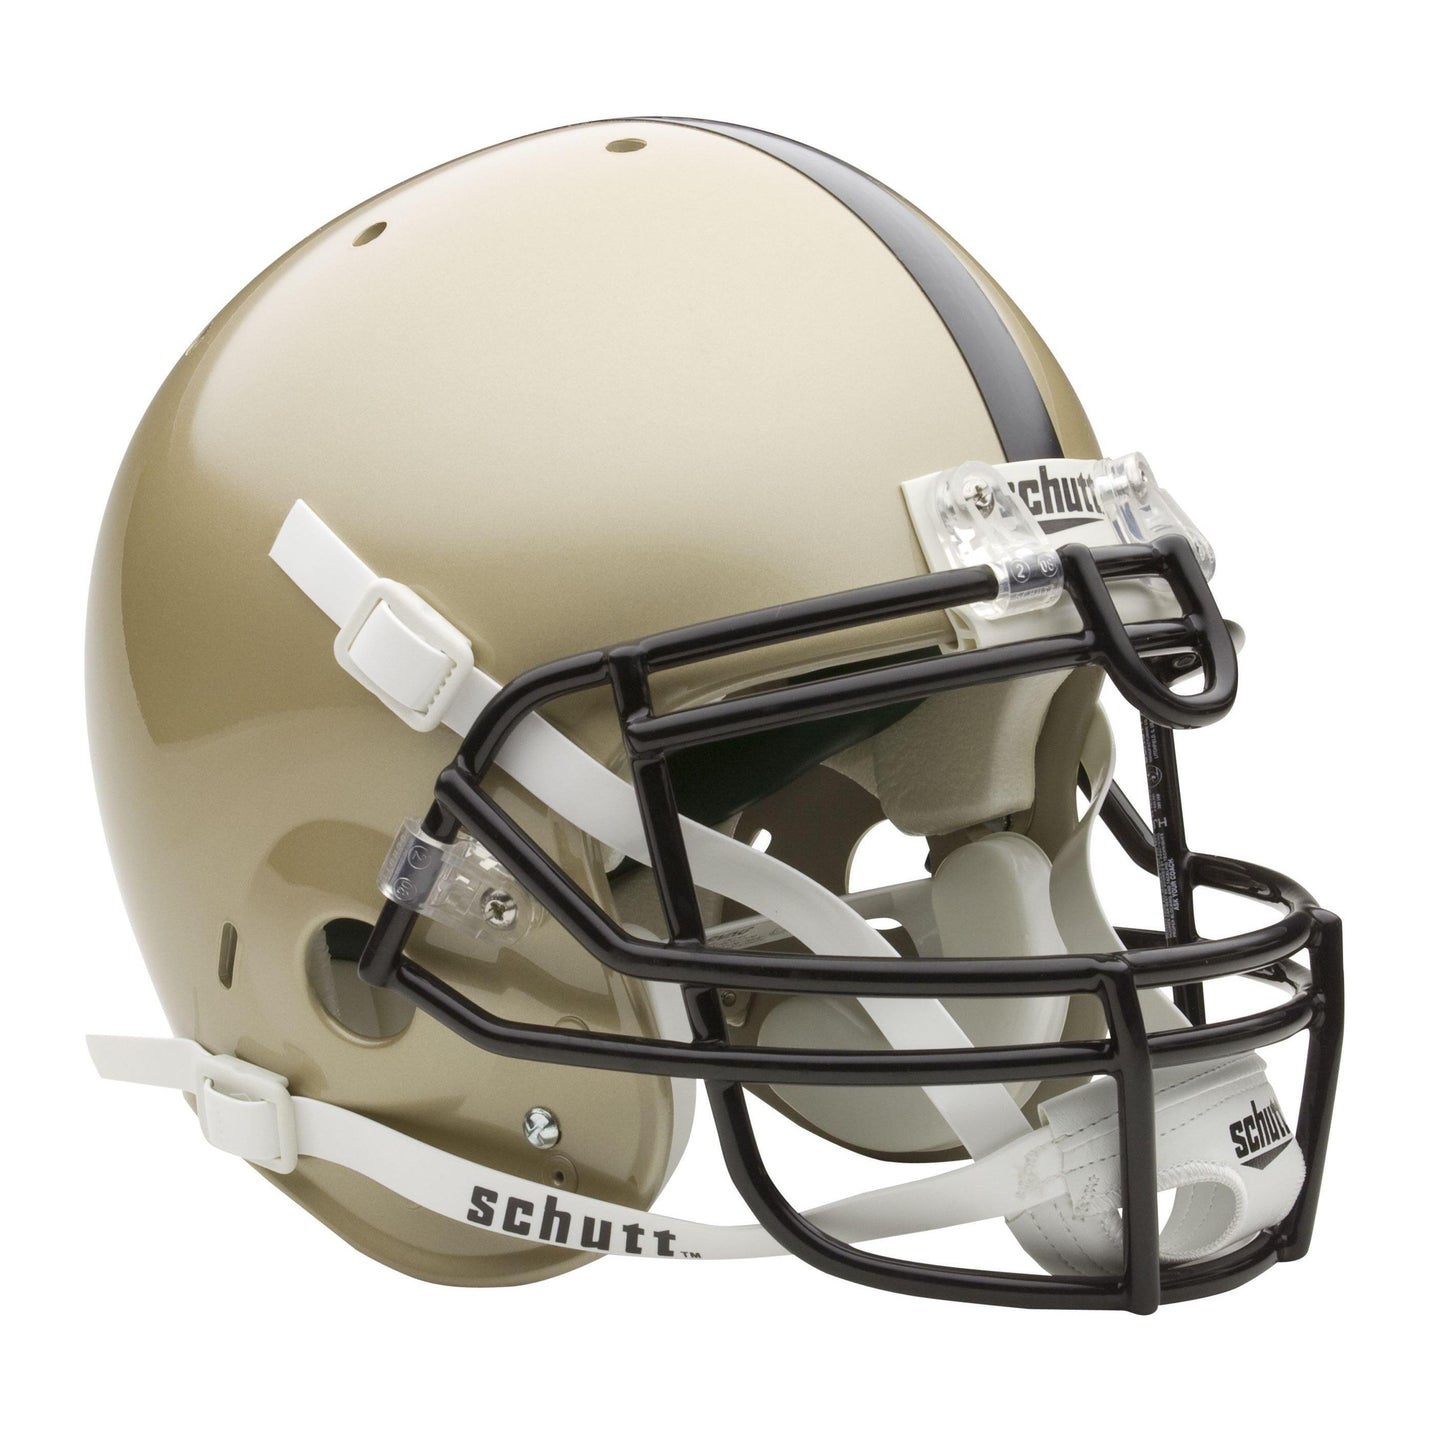 Army Knights College Football Collectible Schutt Mini Helmet - Picture Inside - FANZ Collectibles - Fanz Collectibles